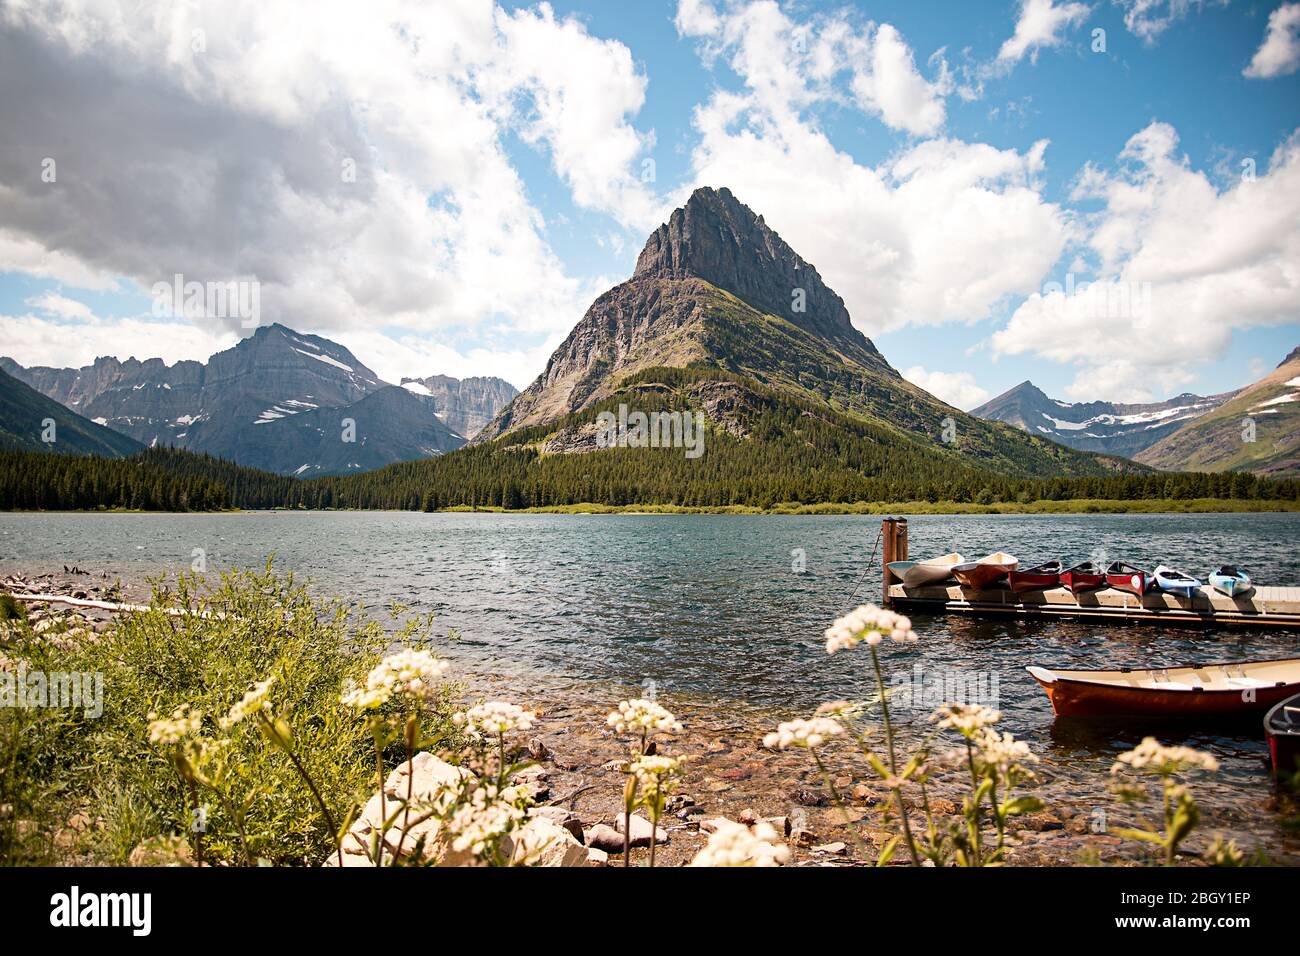 Mountain Peak Landscape Scene of Grinnell Point and Swiftcurrent Lake in Glacier National park. Boats docked in the water with a vibrant blue sky abov Stock Photo